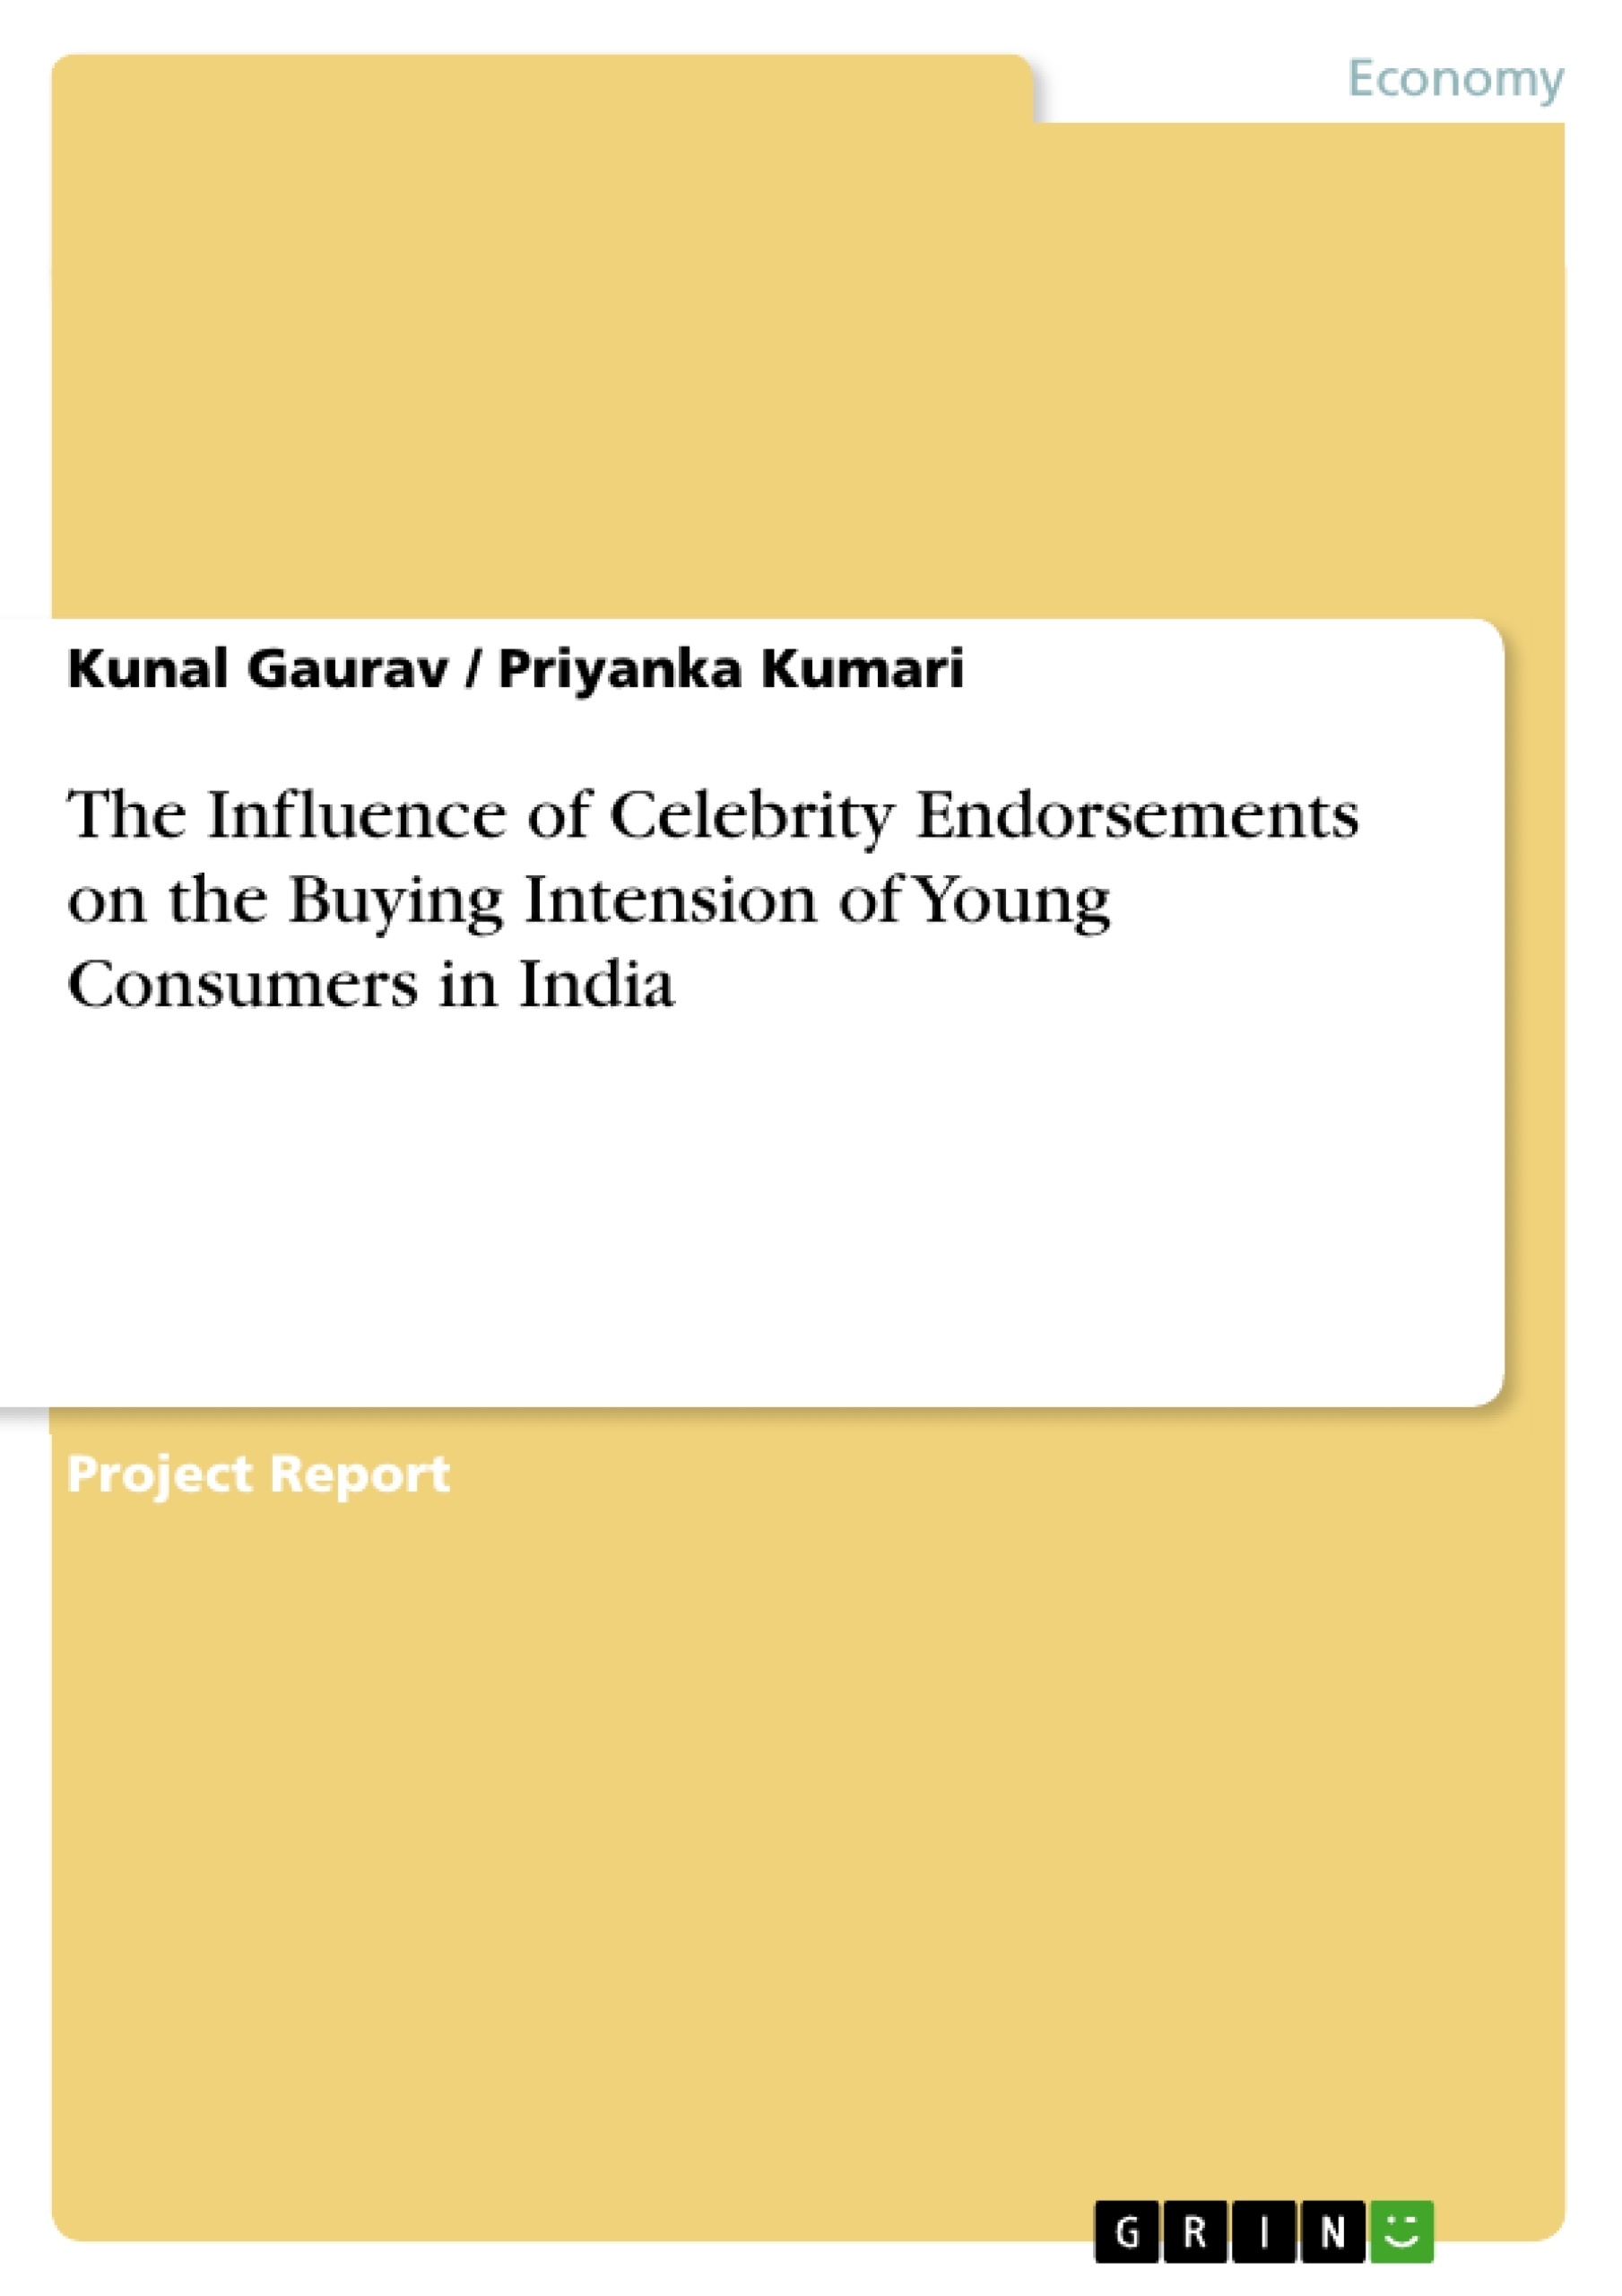 Titre: The Influence of Celebrity Endorsements on the Buying Intension of Young Consumers in India